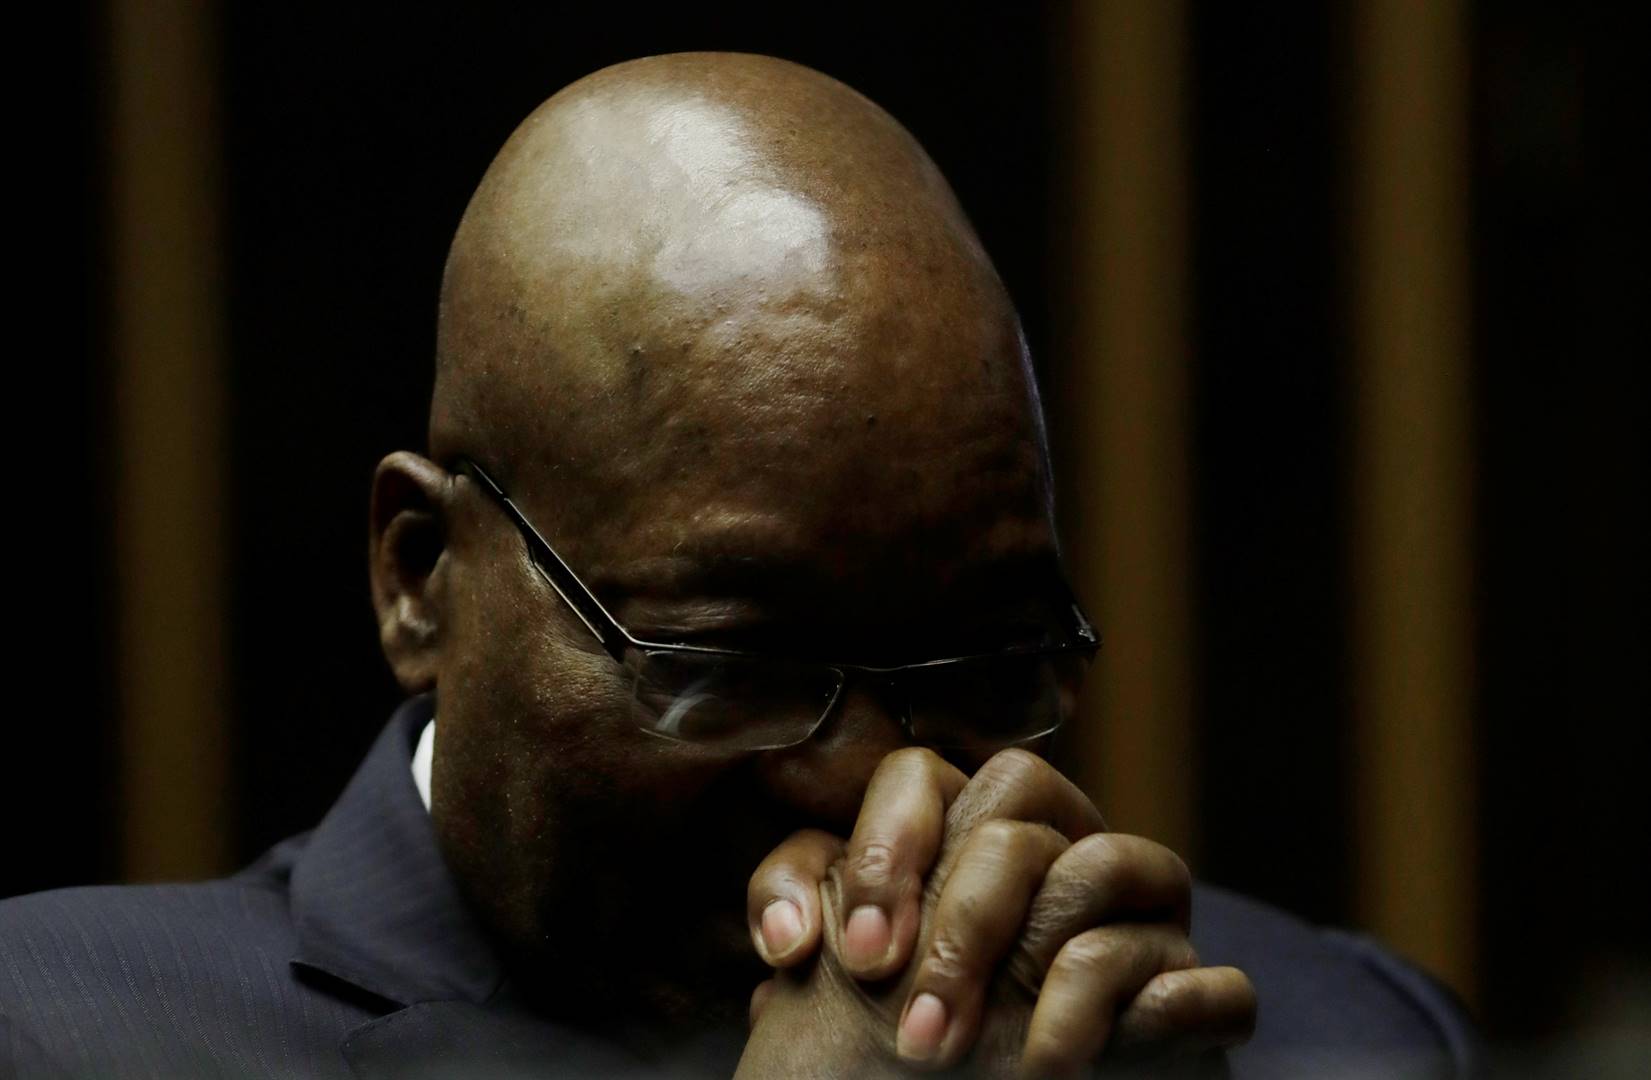 Jacob Zuma sits in court in Pietermaritzburg where he is facing charges that include fraud, corruption and racketeering on Friday (May 24 2019). Picture: Themba Hadebe/Reuters